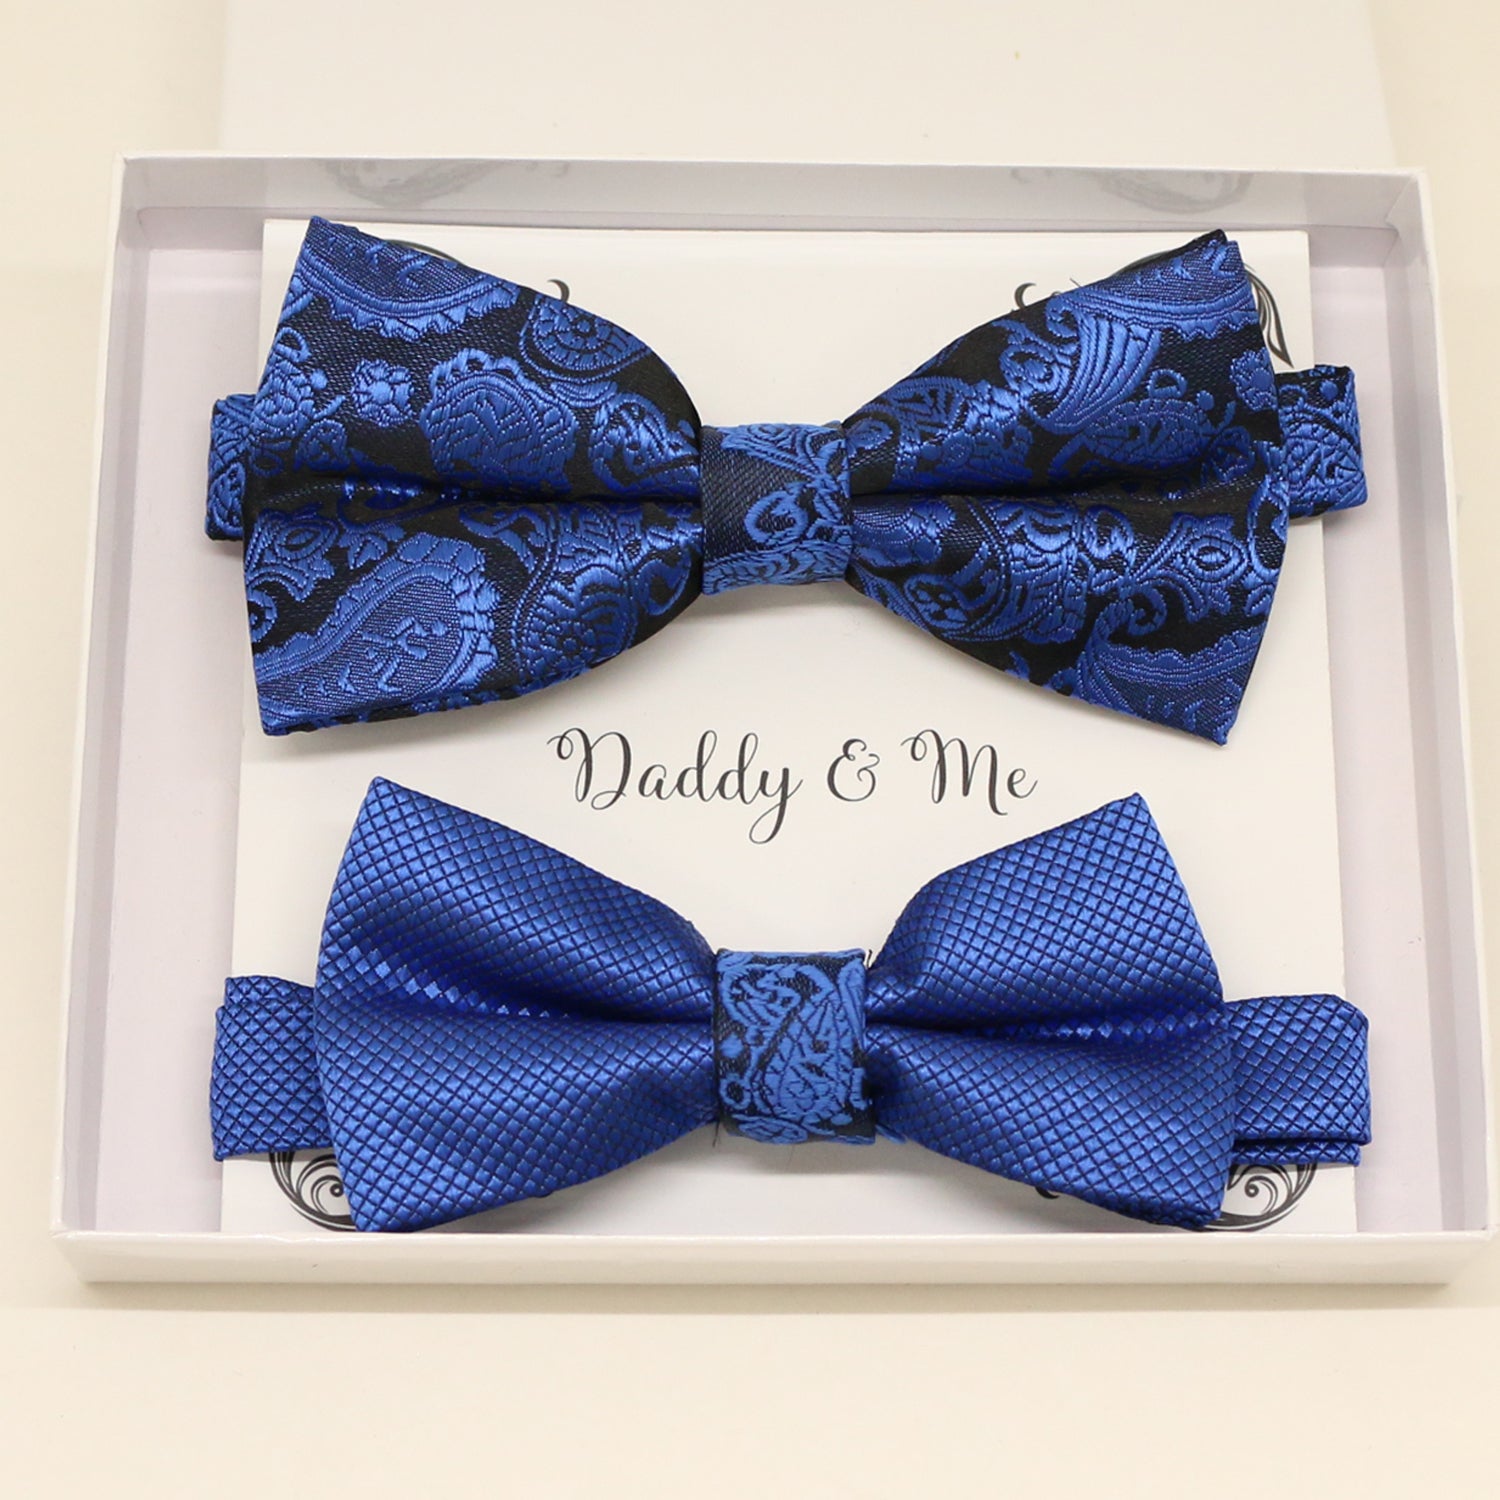 Paisley Royal blue Bow tie set for daddy and son, Paisley bow tie, Daddy me gift set, Father son match ,Royal blue kids bow, Grandpa gift